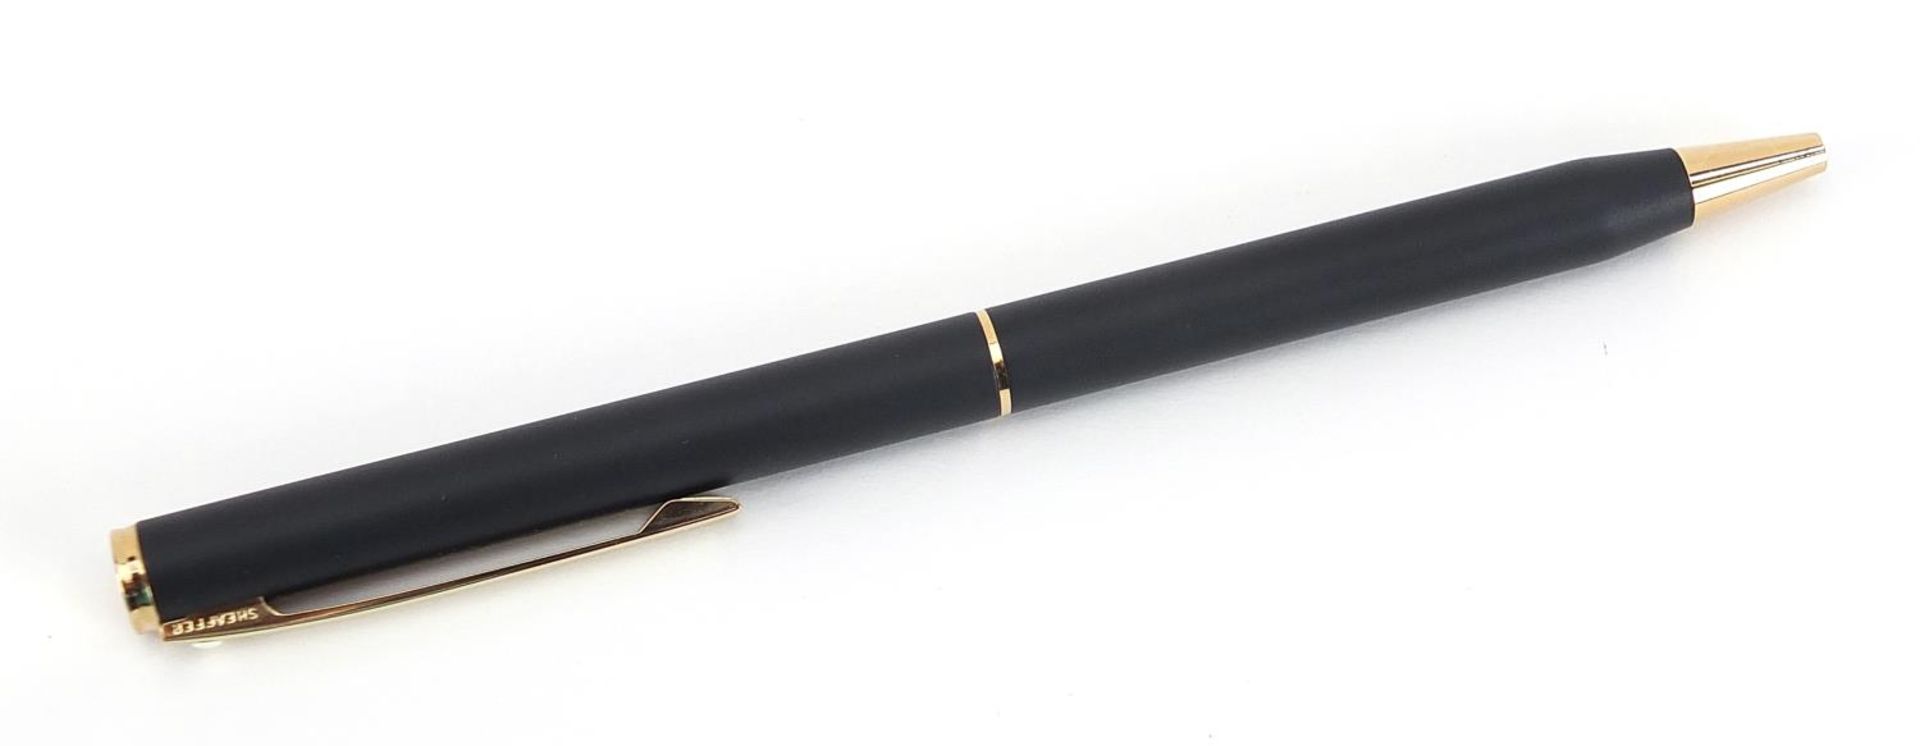 Sheaffer ballpoint pen with case, the case 18cm wide - Image 3 of 5